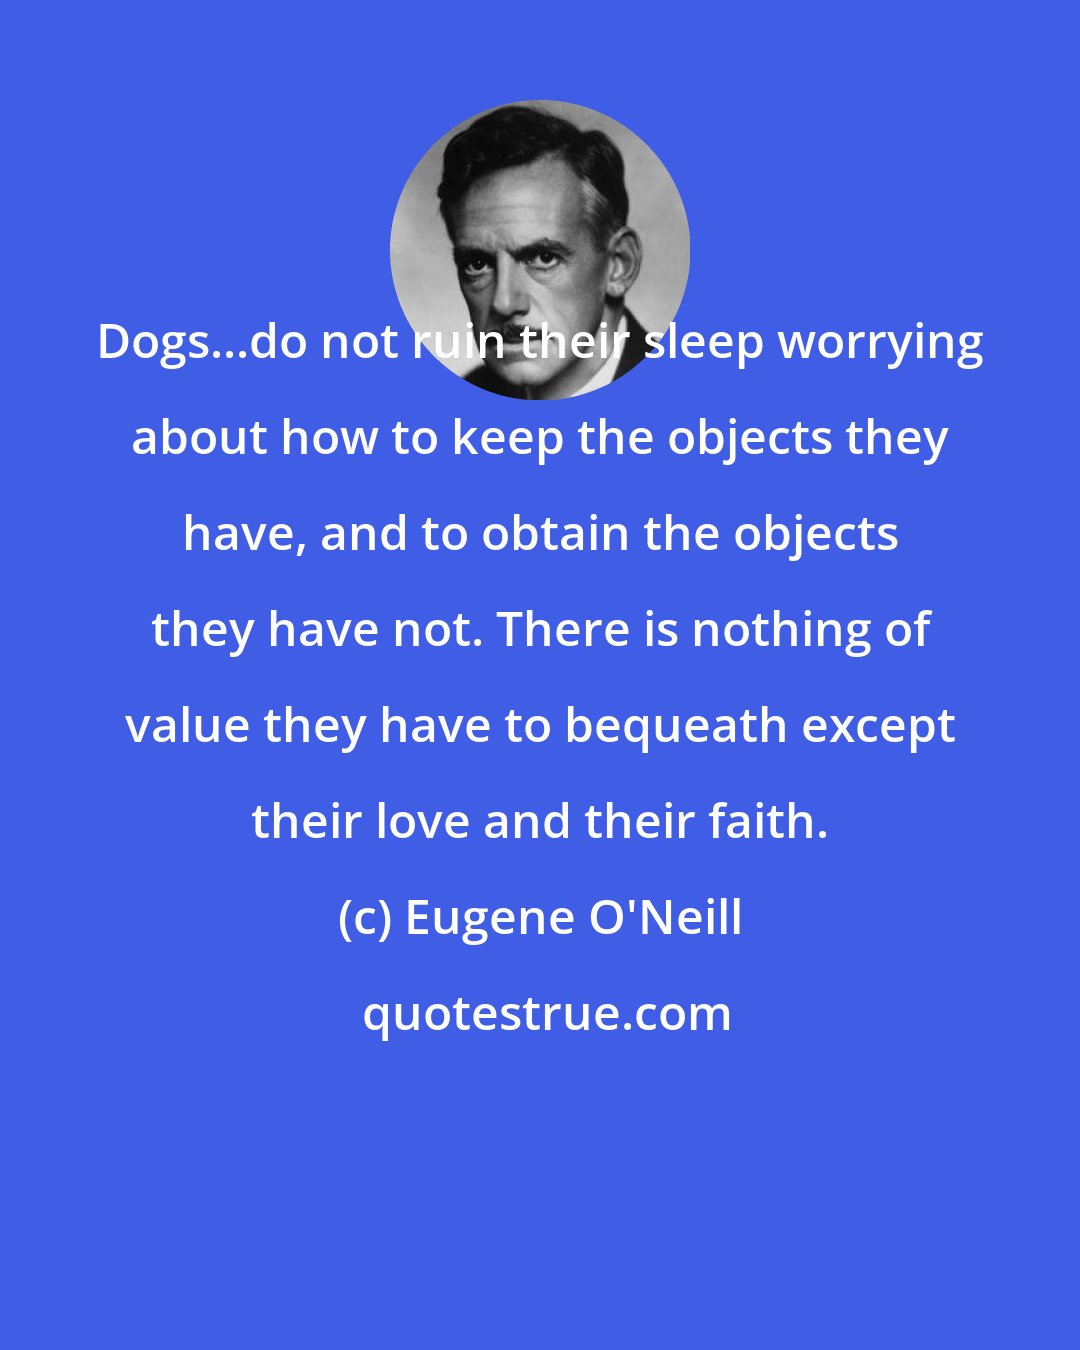 Eugene O'Neill: Dogs...do not ruin their sleep worrying about how to keep the objects they have, and to obtain the objects they have not. There is nothing of value they have to bequeath except their love and their faith.